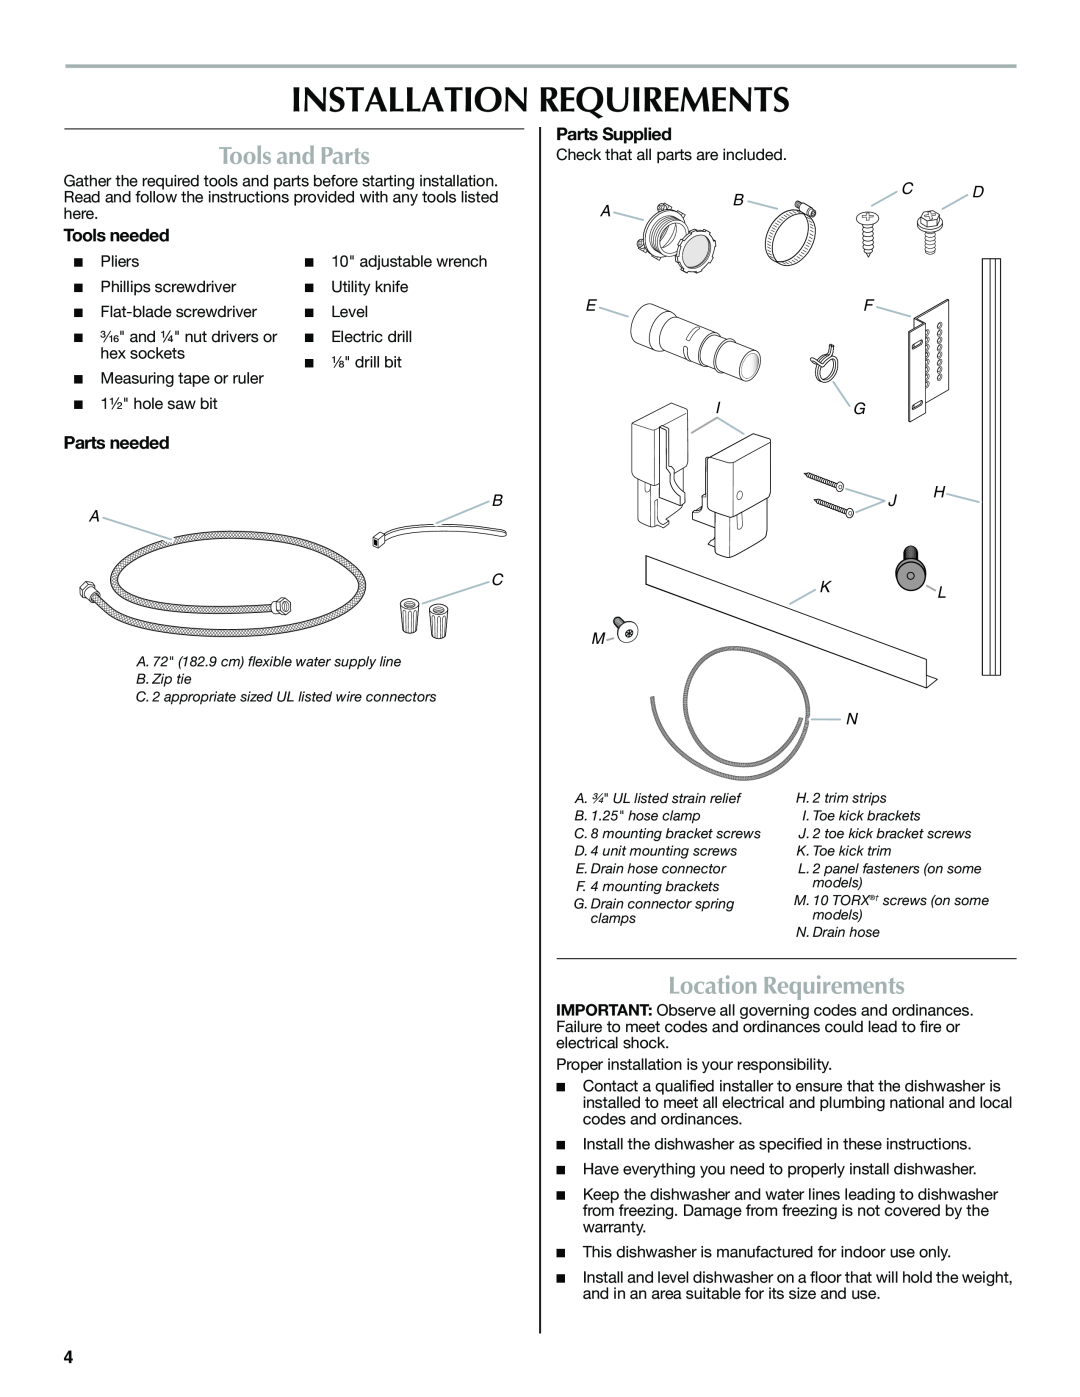 Maytag W10185071B Installation Requirements, Tools and Parts, Location Requirements, Bc D, B A C, Ef Ig J H K L M N 